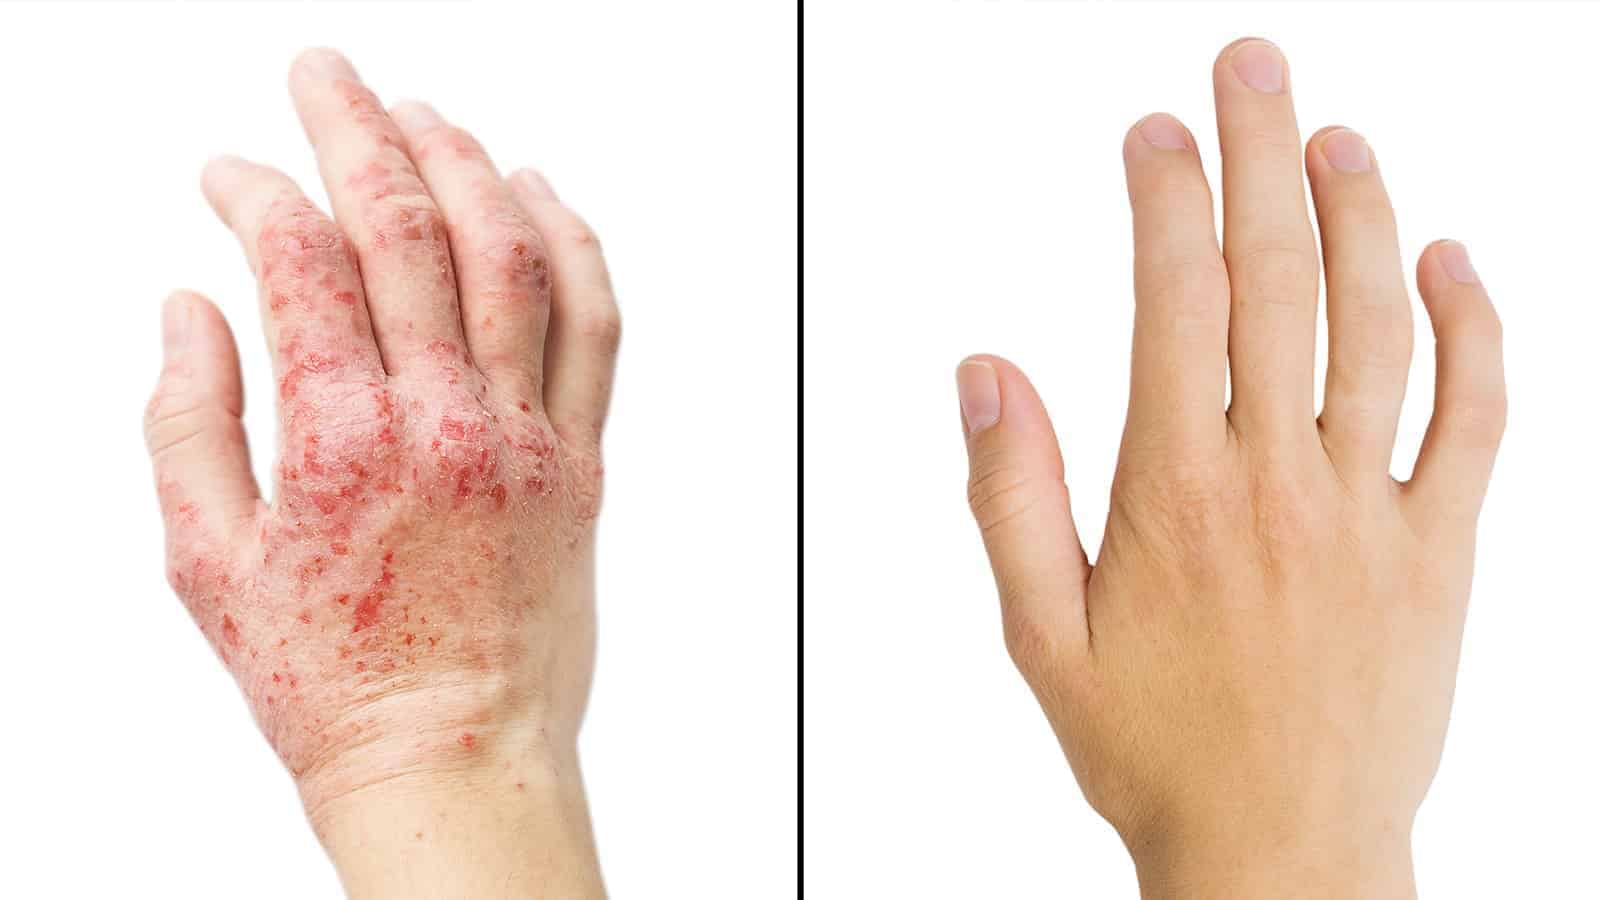 Researchers Reveal 15 Ways To Get Rid Of Eczema